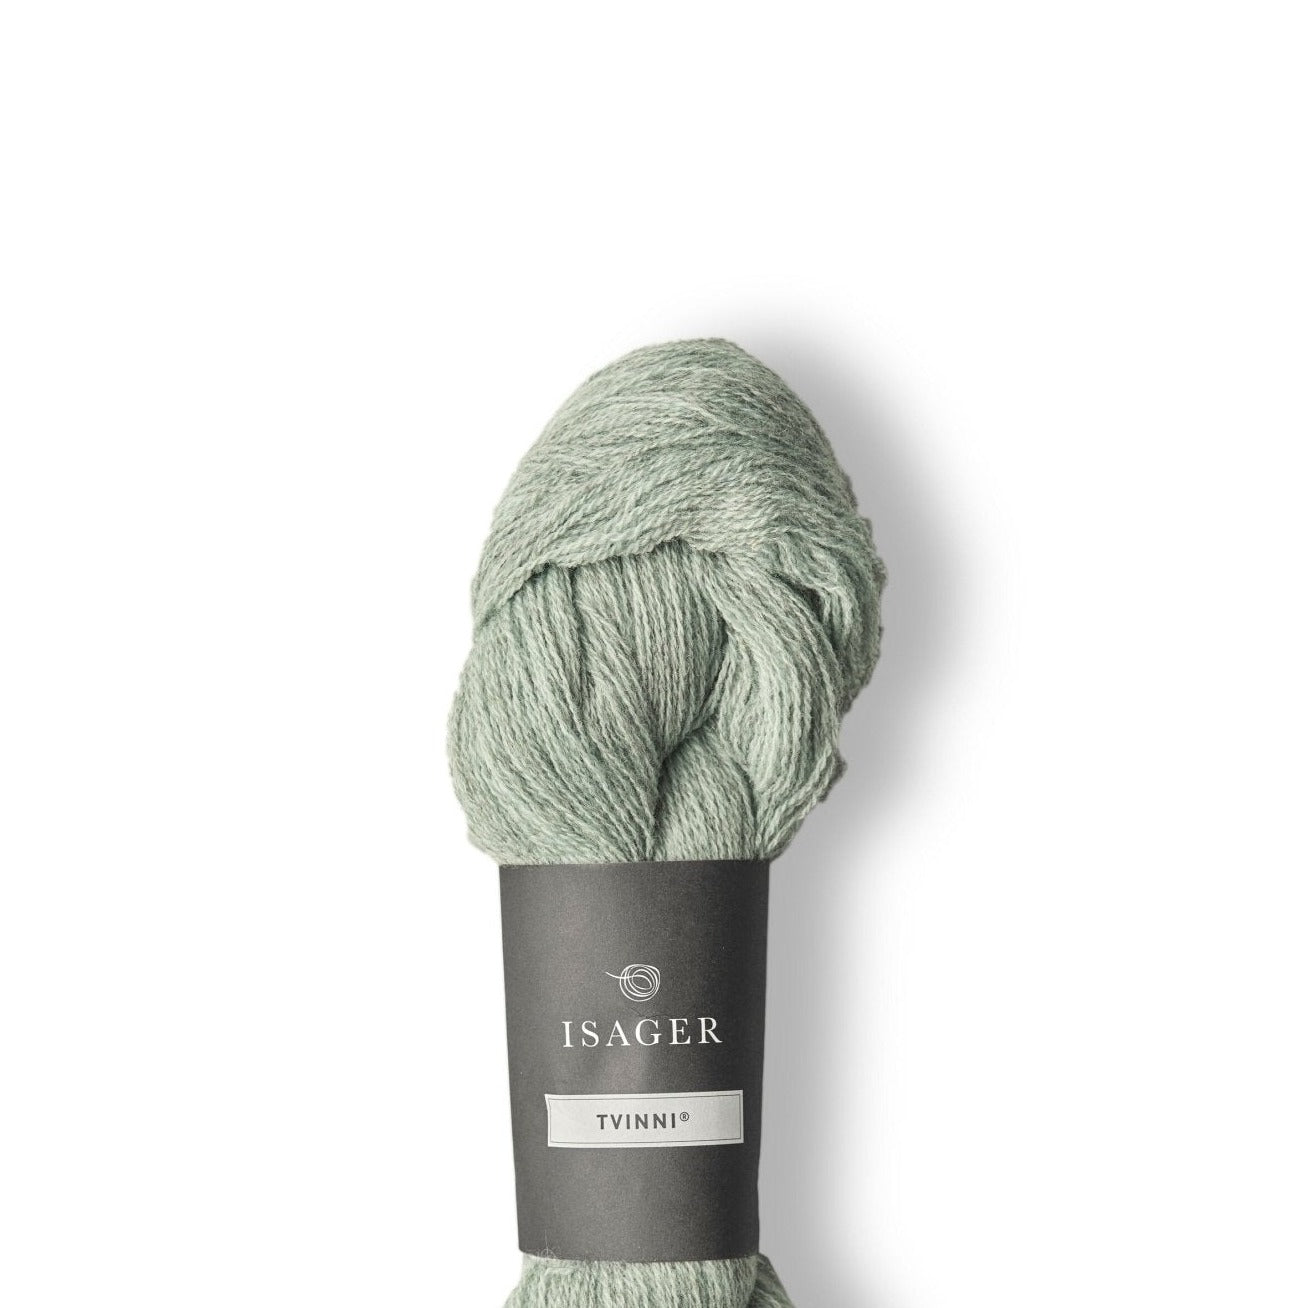 Isager Tvinni - 10s - 4 Ply - Isager - The Little Yarn Store